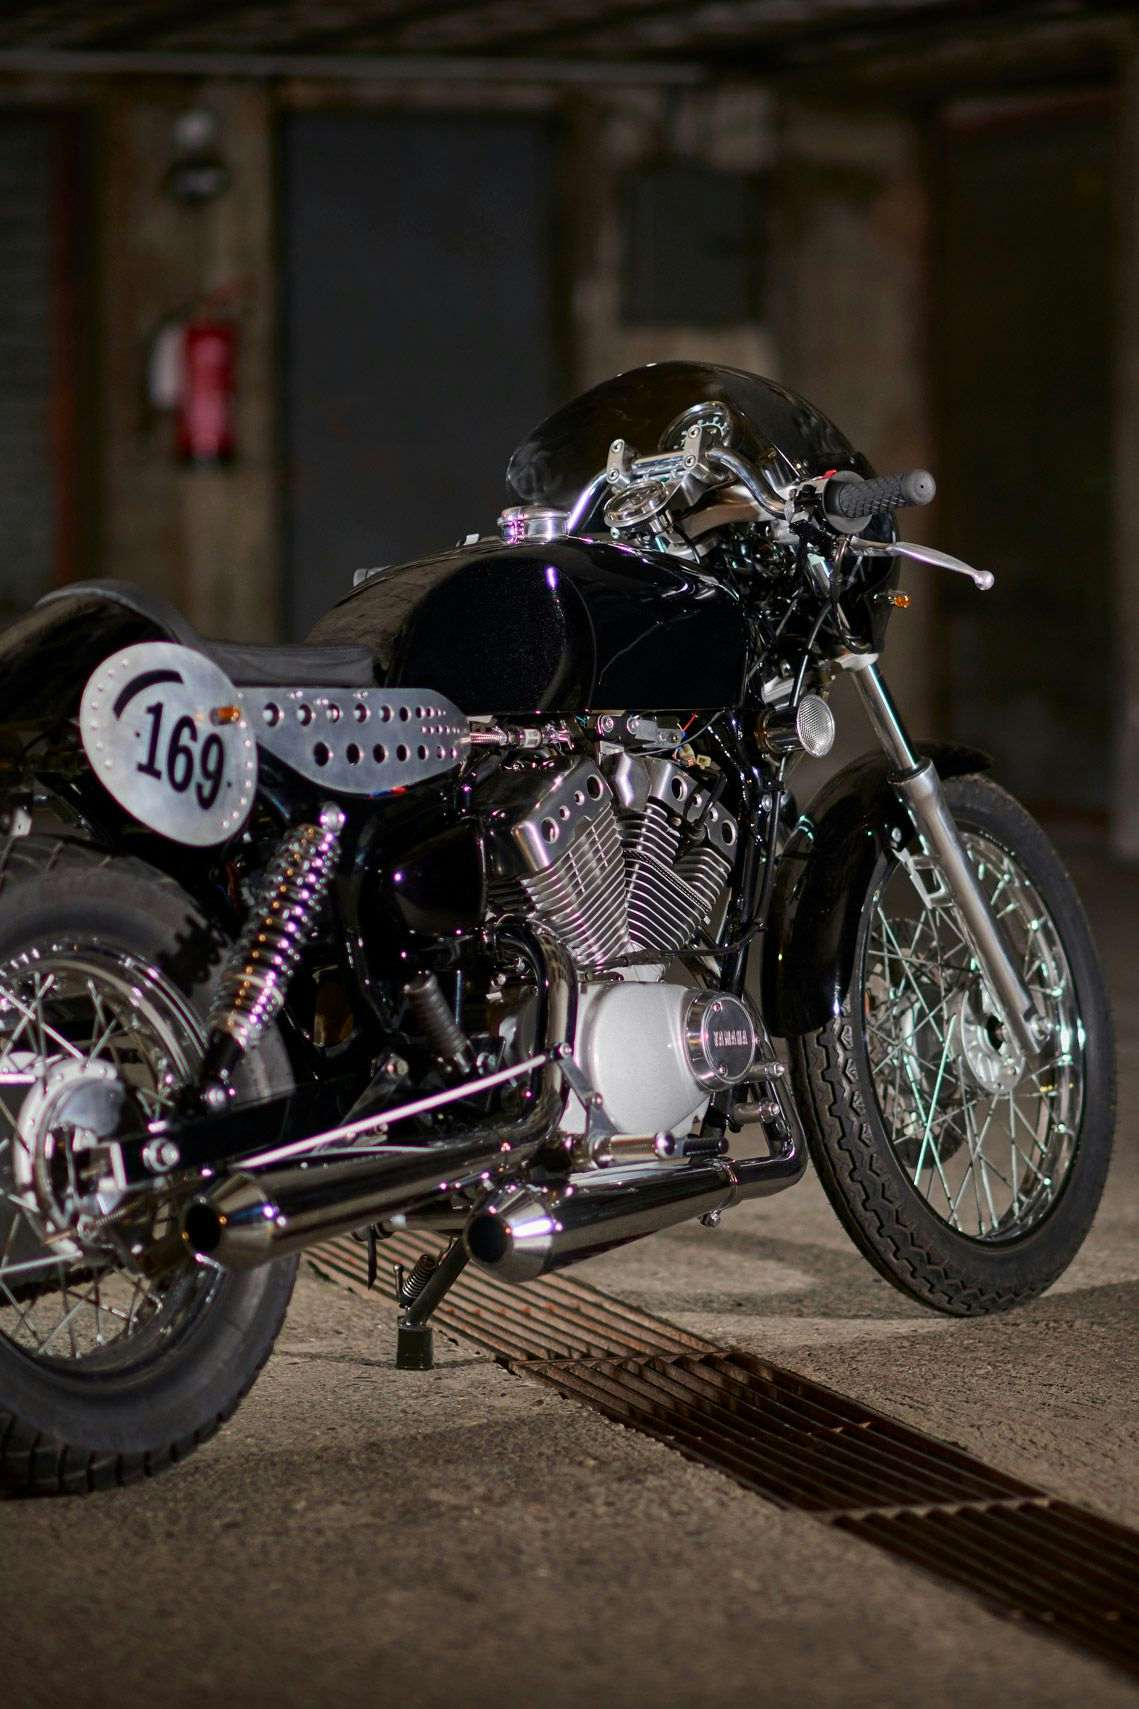 Yamaha Virago 125 cafe racer kit by Rubber and Steel. Photography by Xavier Wendling.